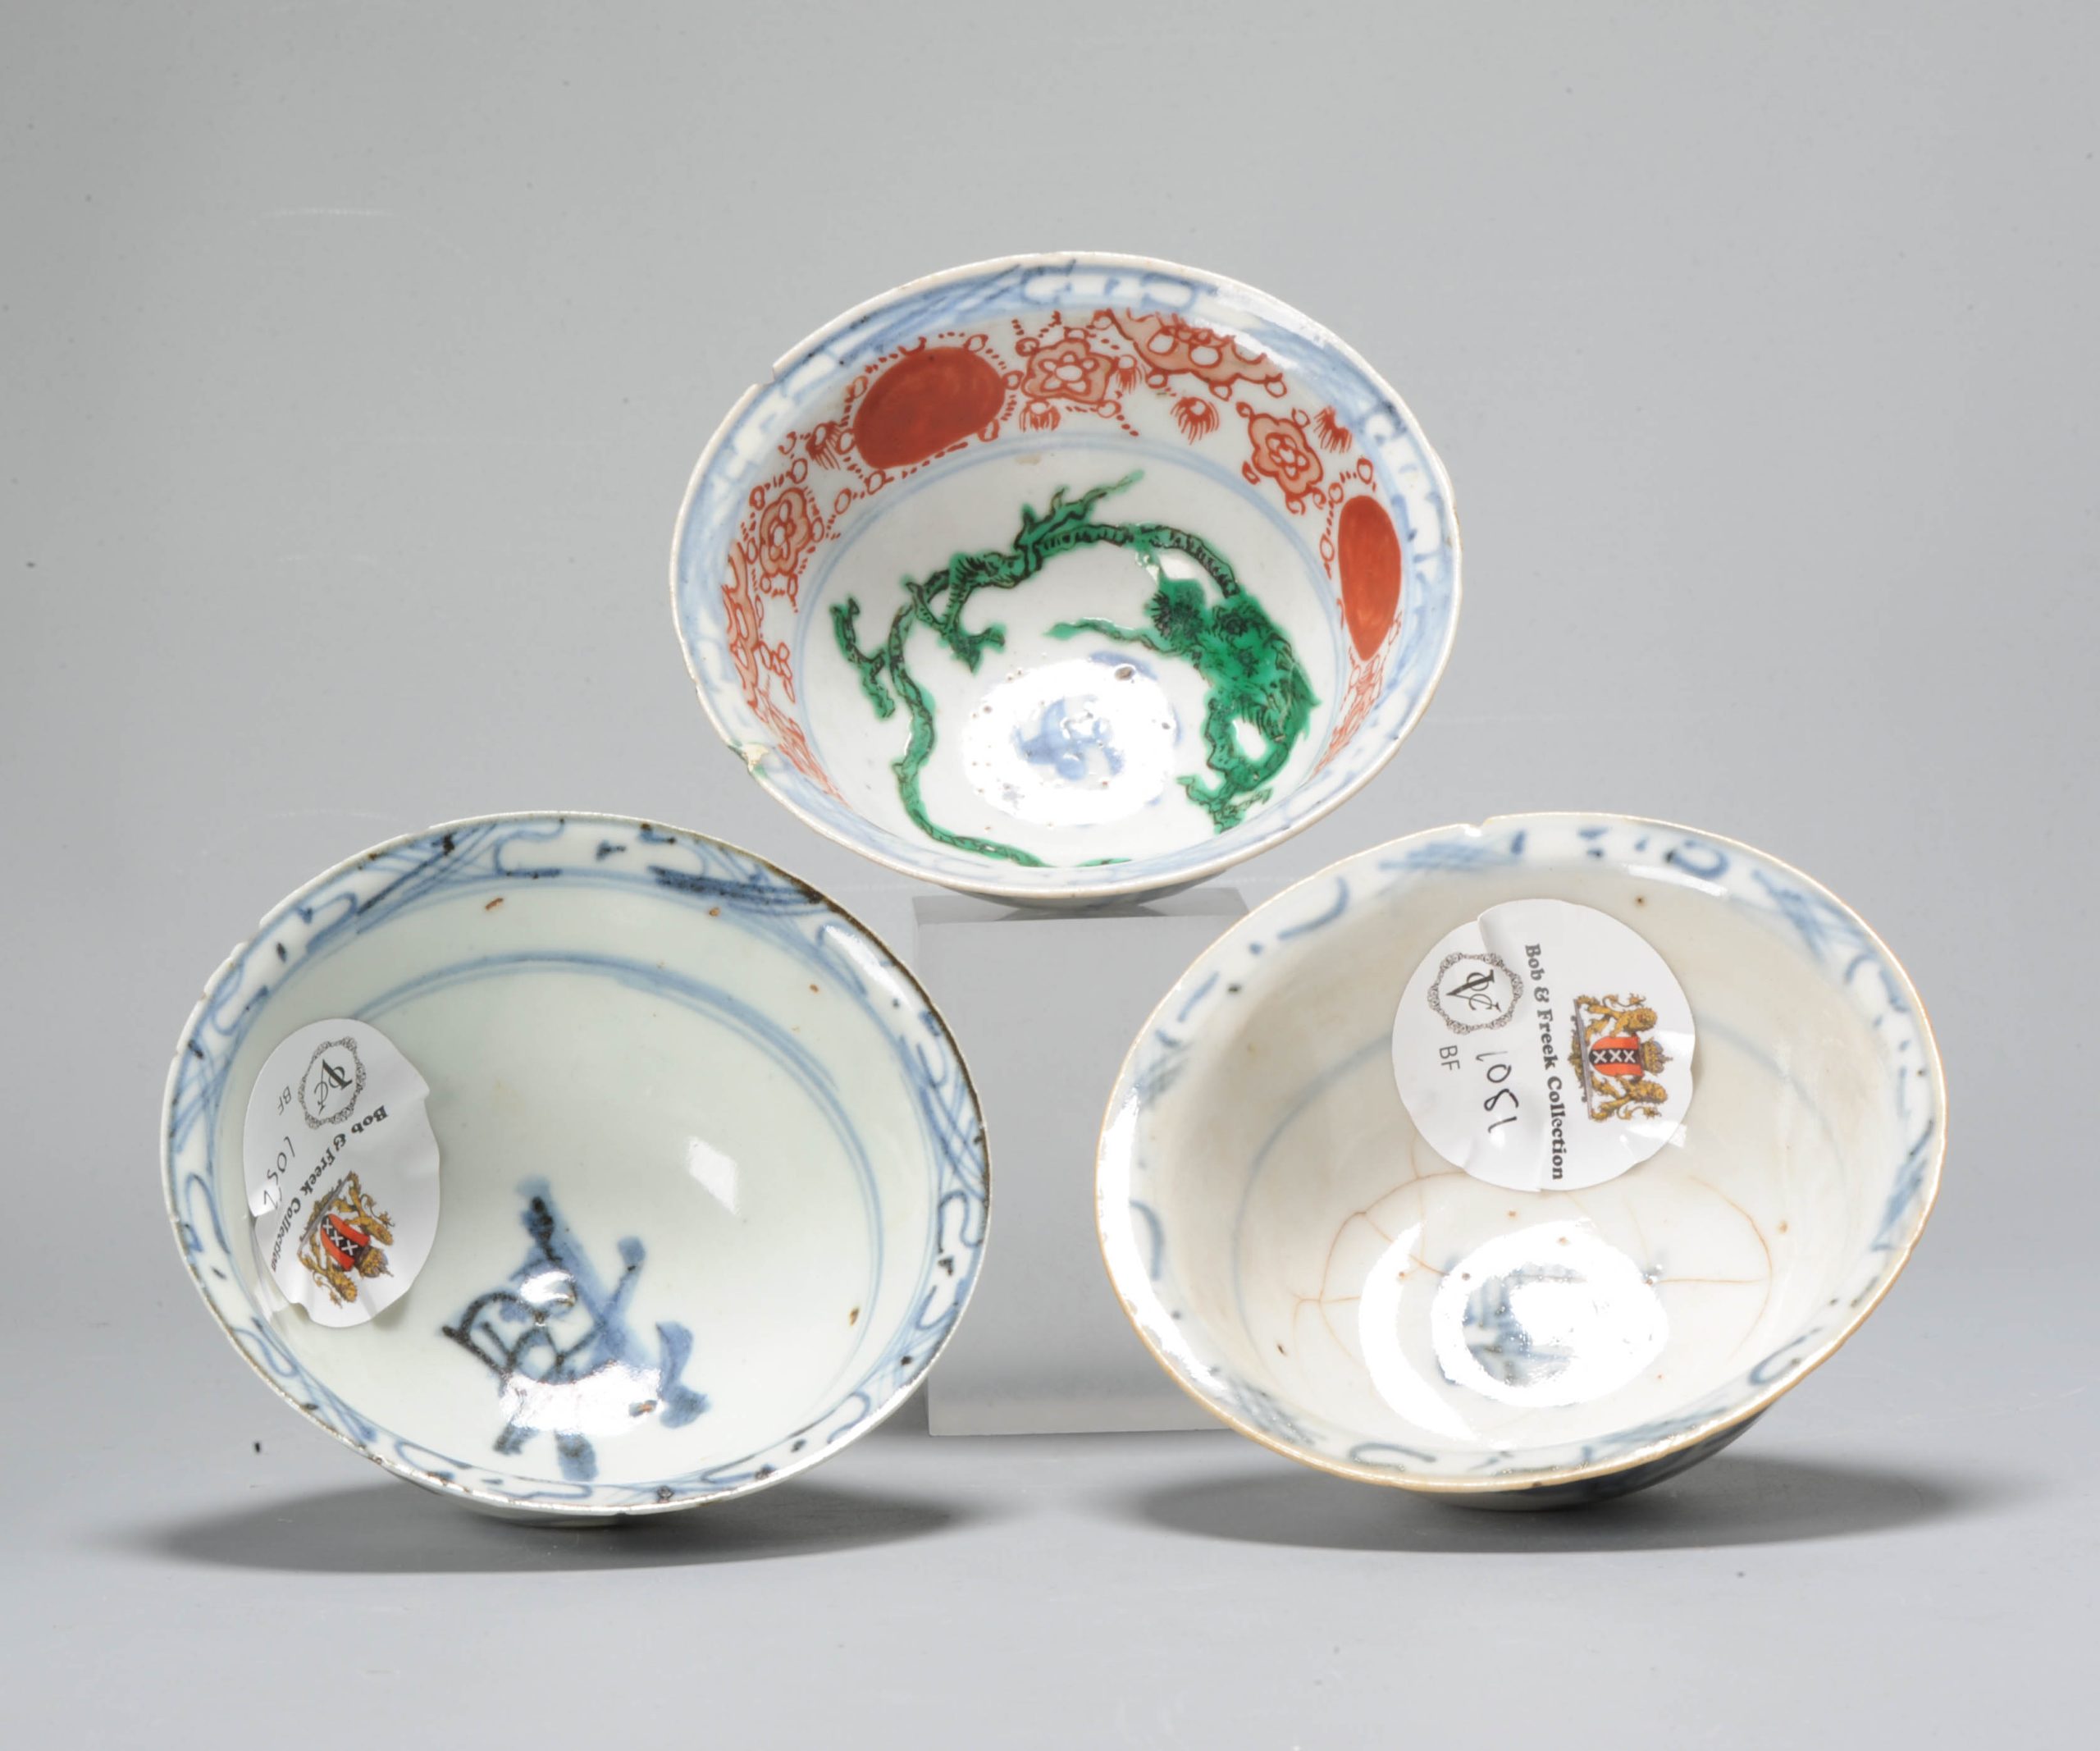 1042, 1051 & 1052. Lovely Trio of late ming bowls. 1600-1650. Chinese or Japanese